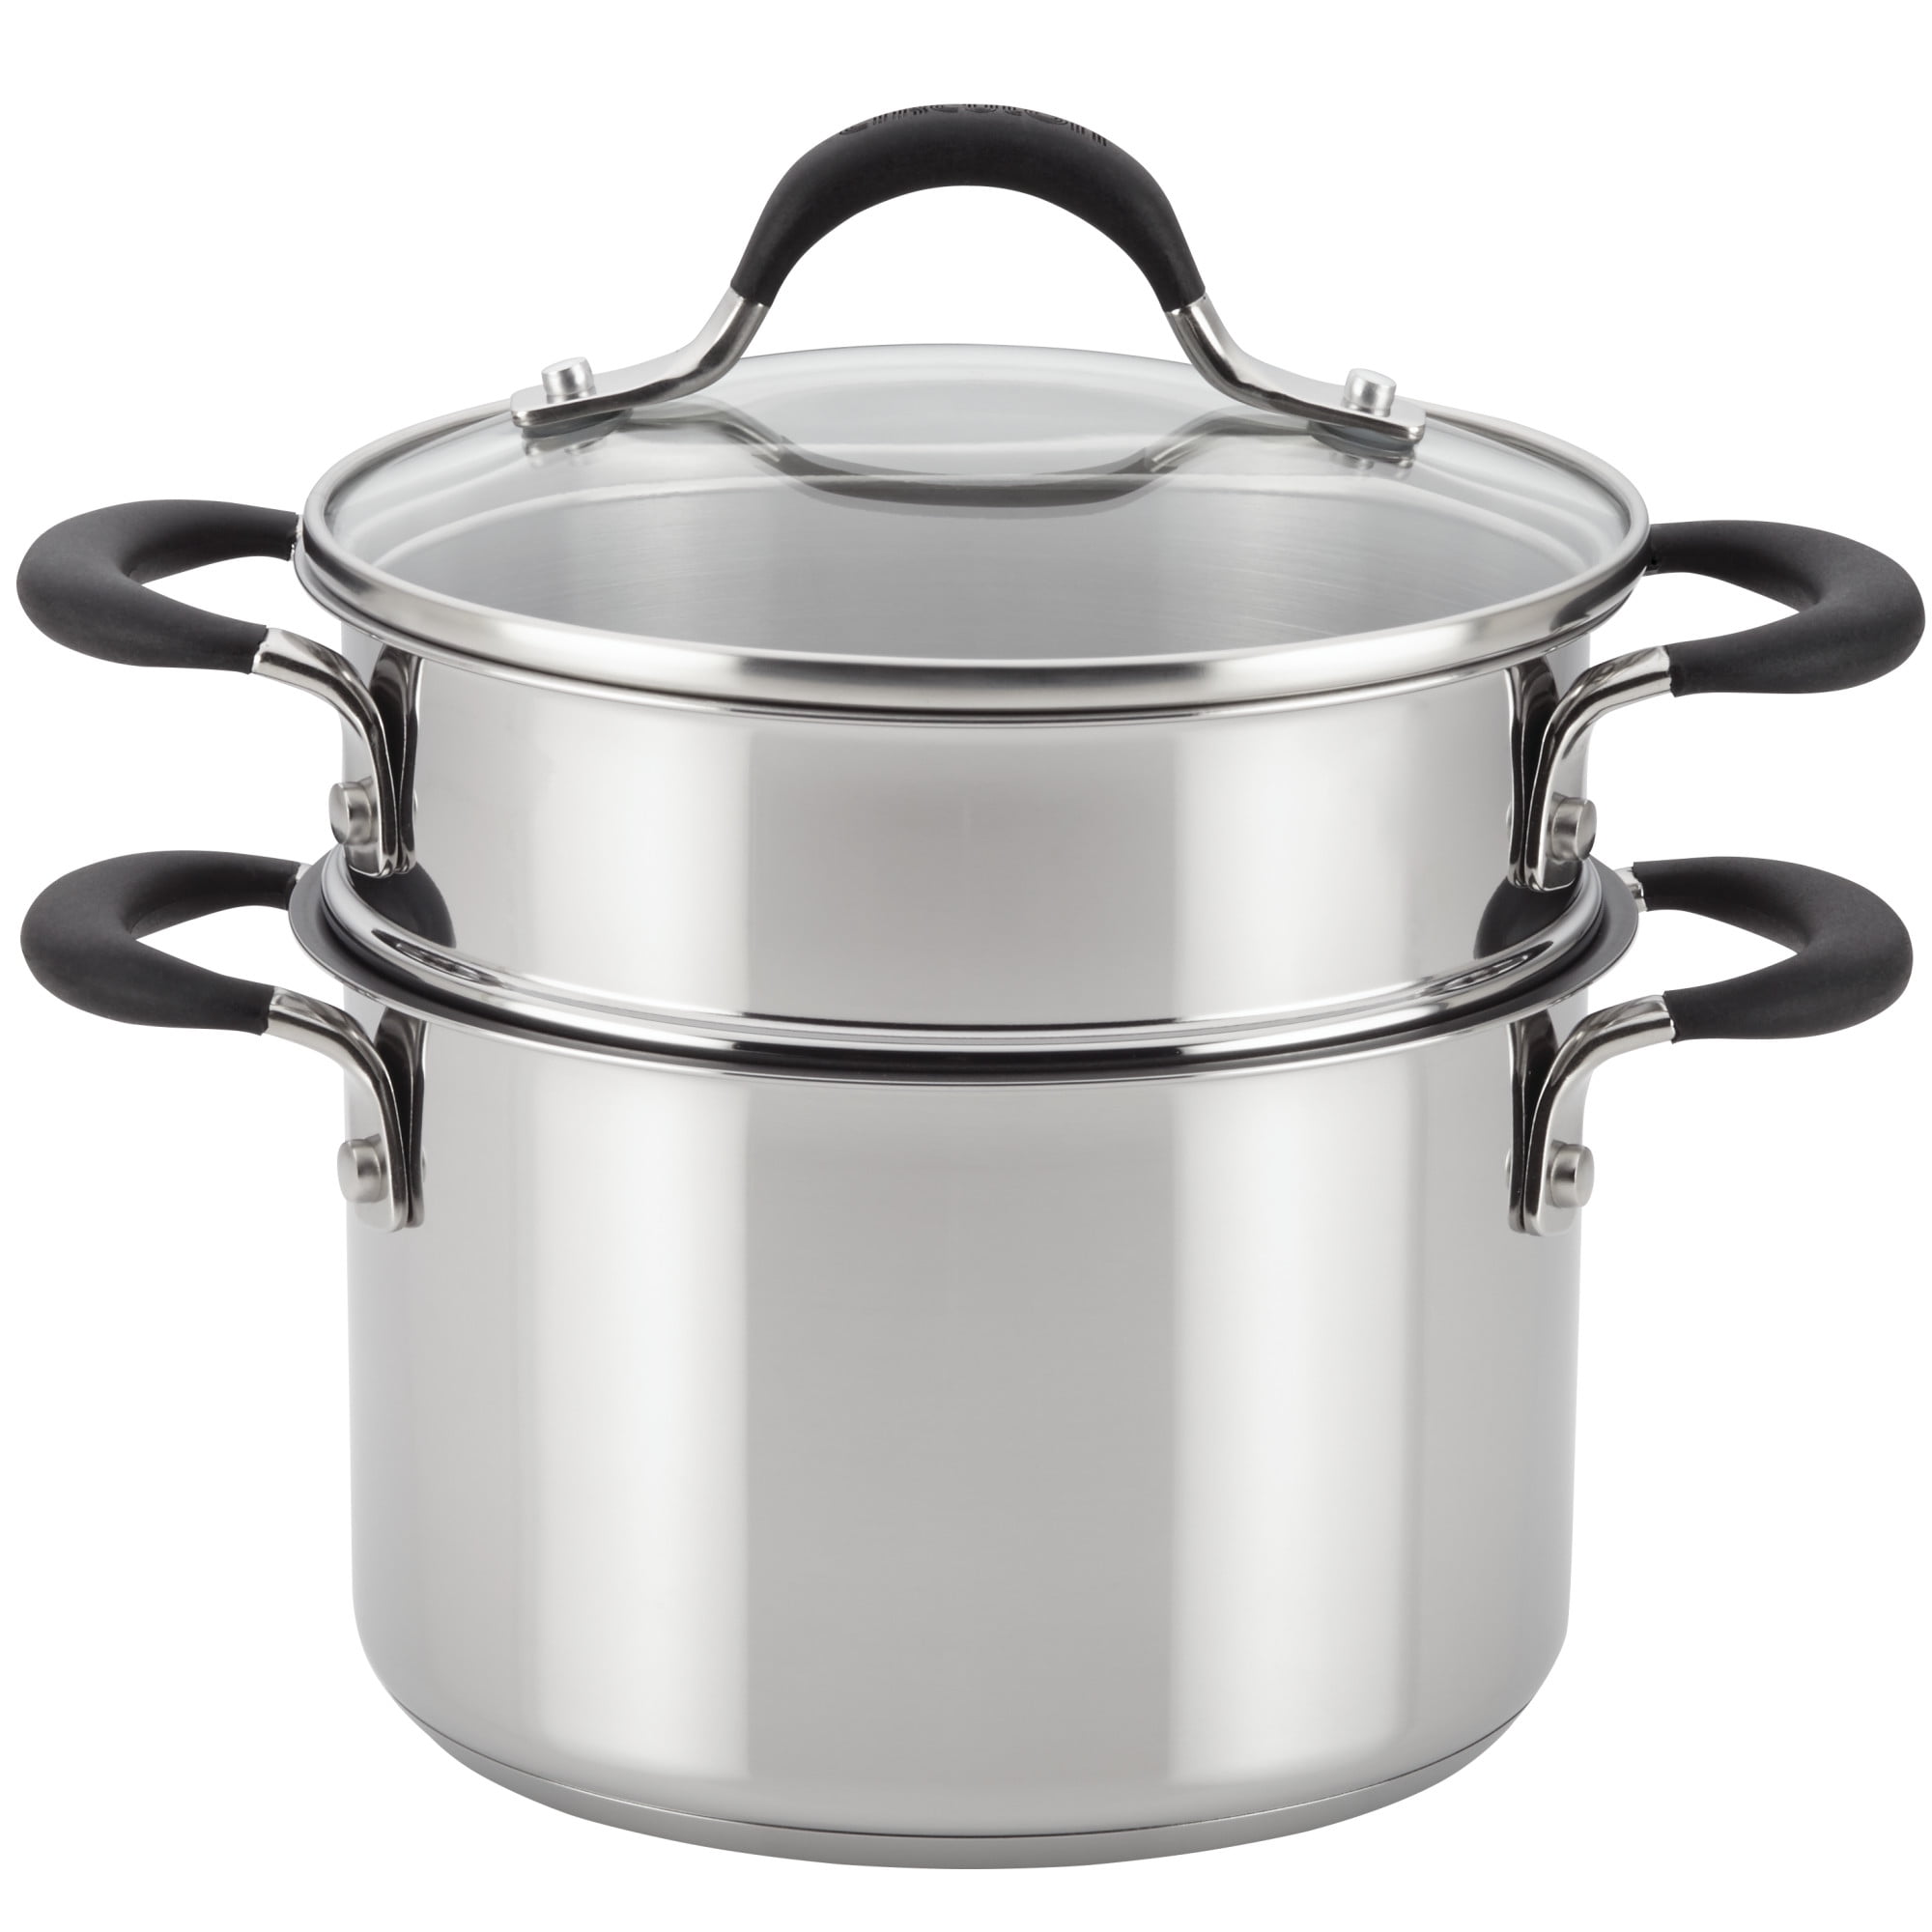 Circulon Momentum Stainless Steel Nonstick 4 qt. Covered Casserole with Locking Lid